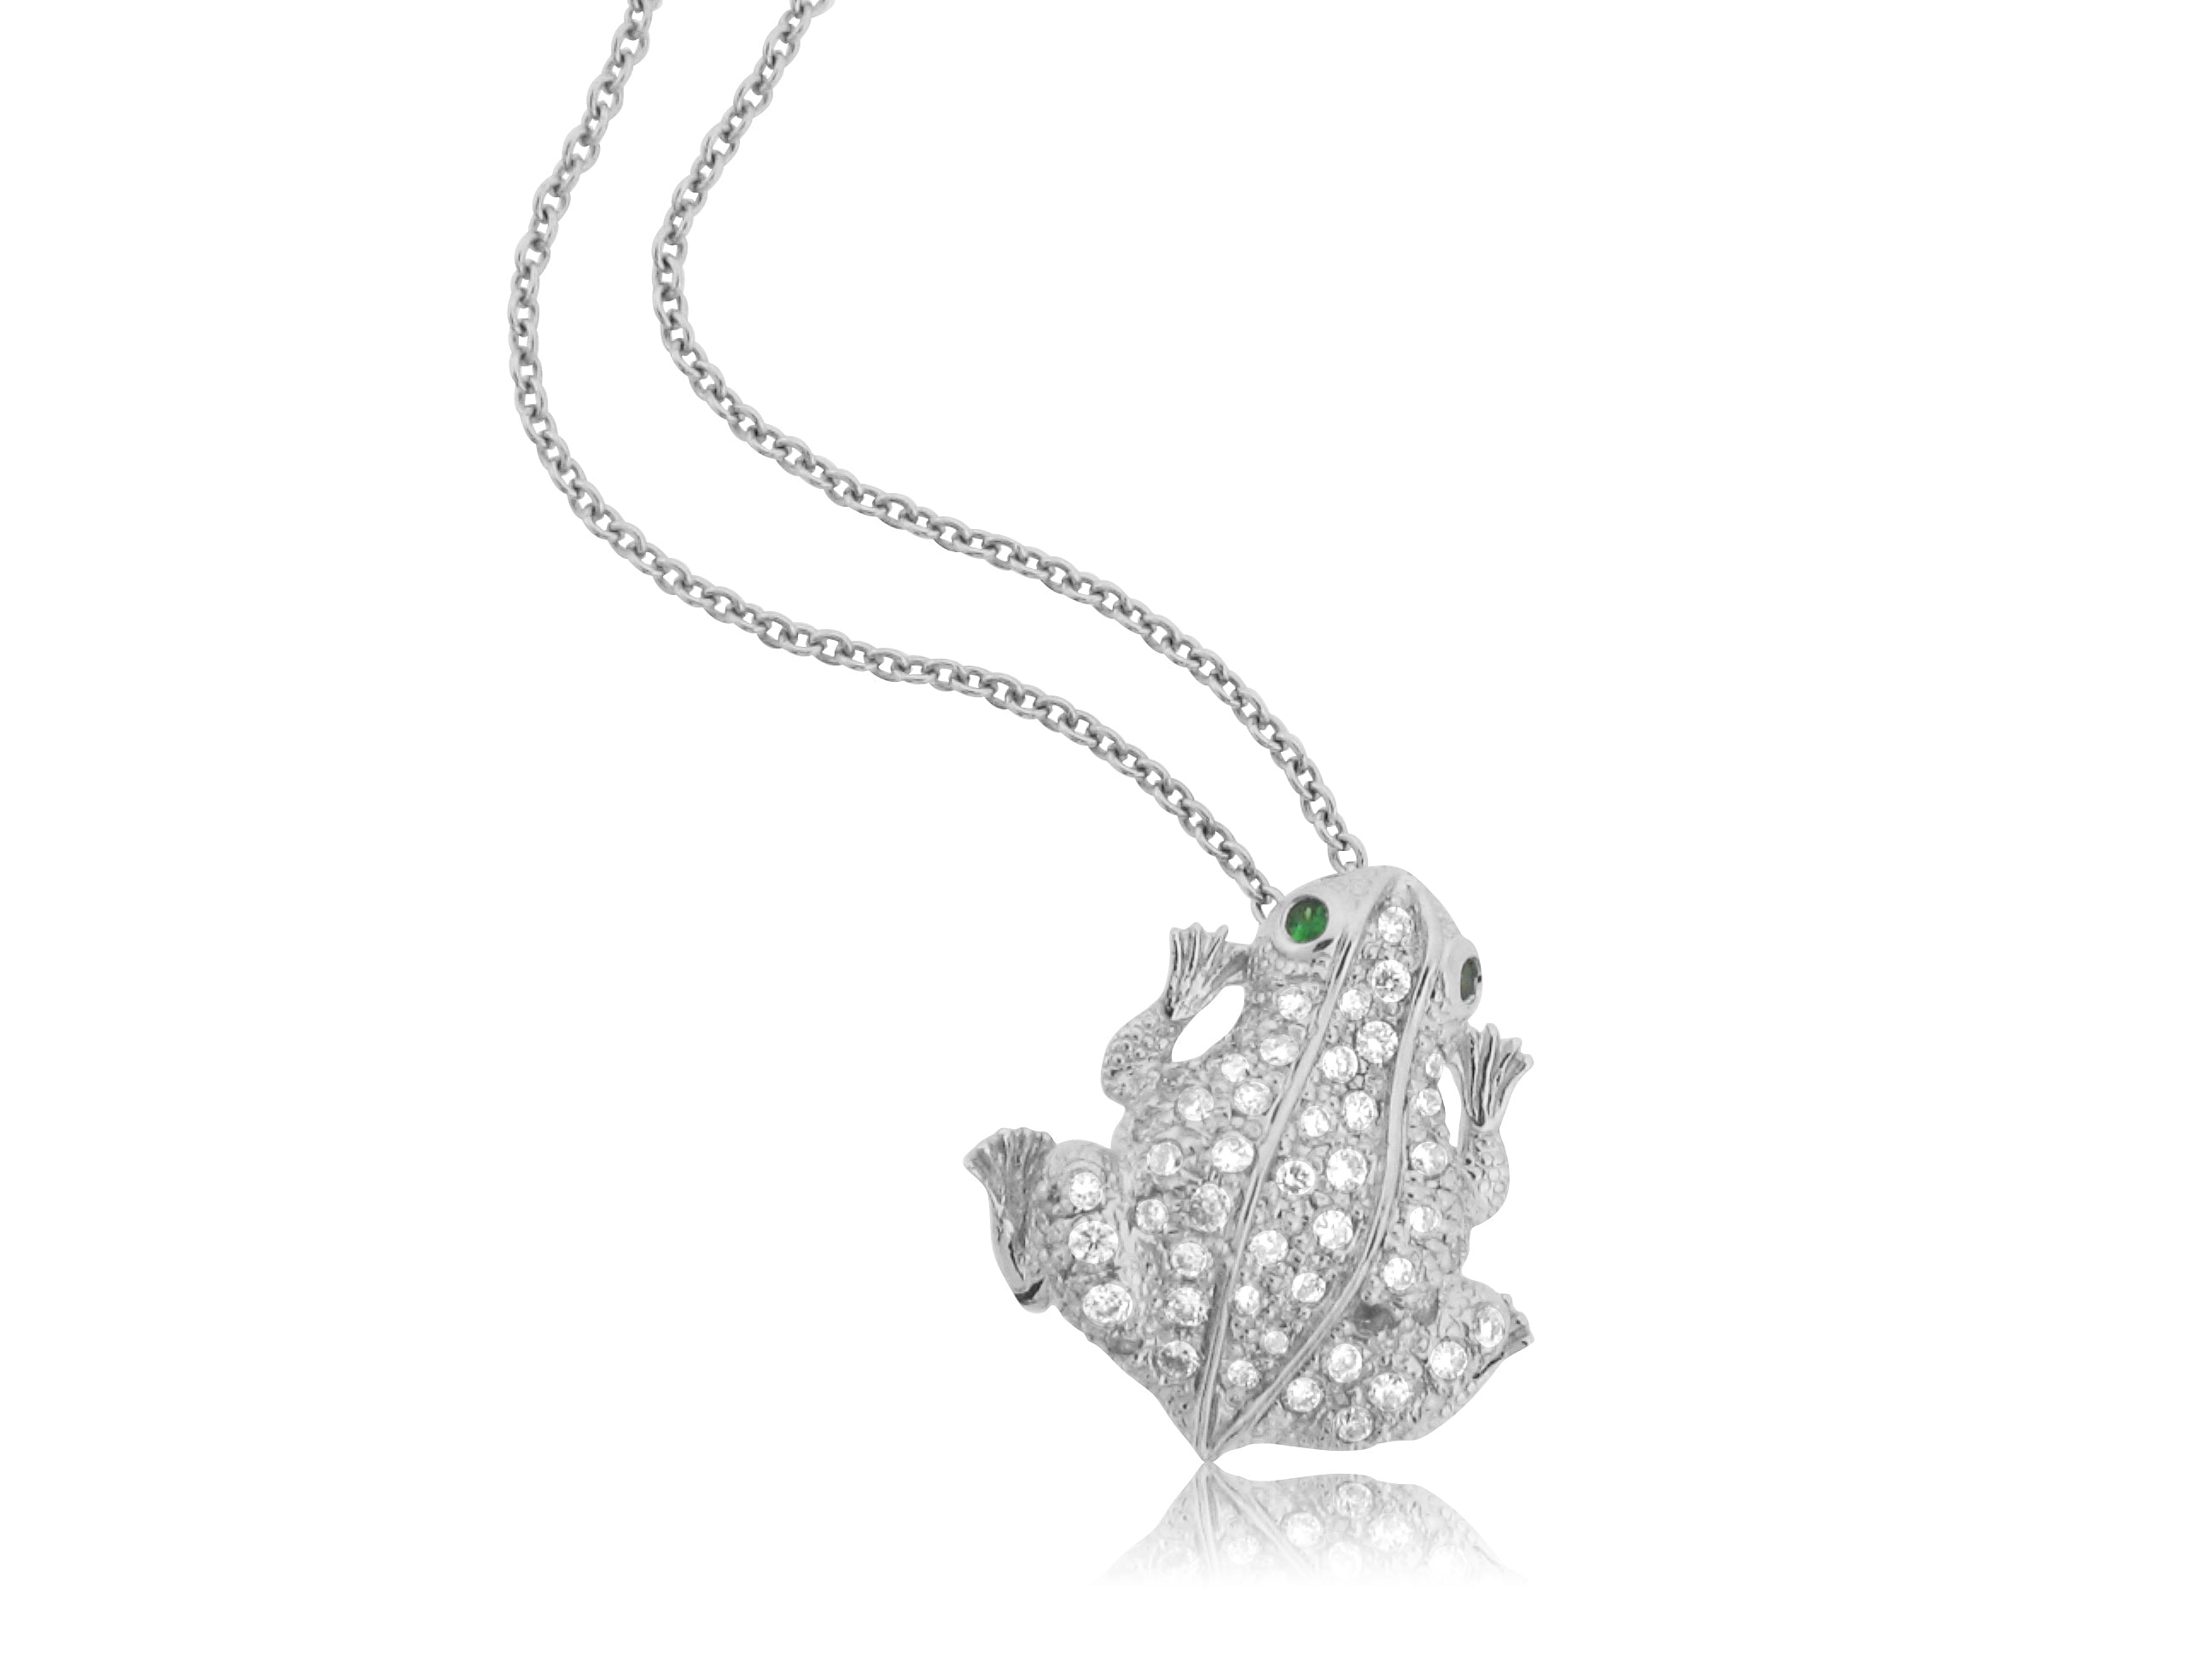 ROBERTO COIN 18K WHITE GOLD 0.30CT SI/G DIAMOND FROG PENDANT FROM THE TINY TREASURES COLLECTION